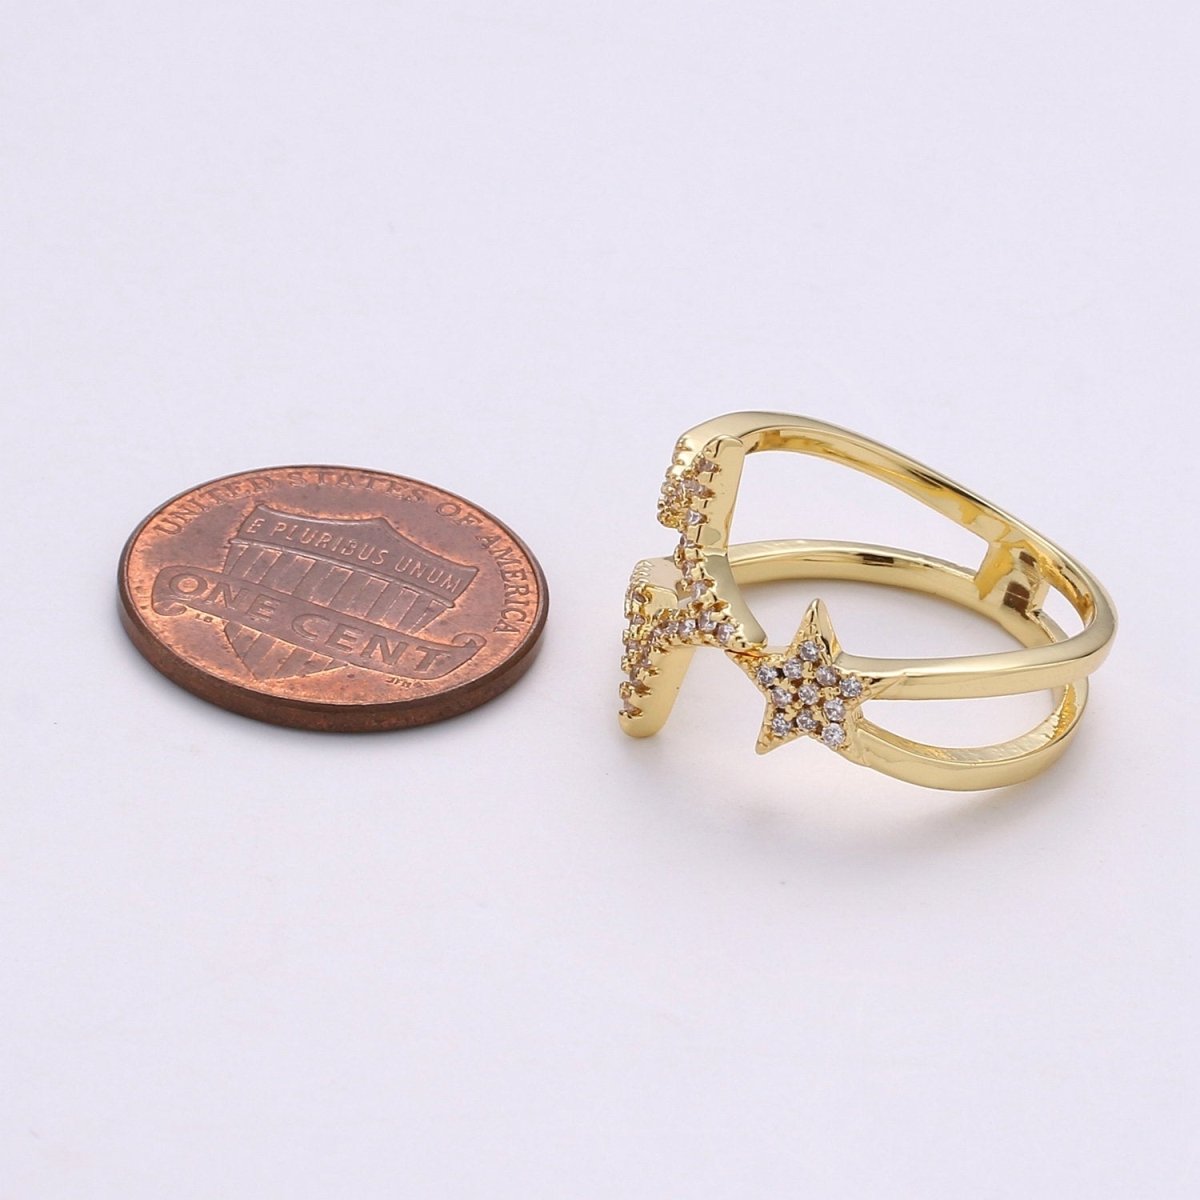 Gold Star Ring, Dainty Star Ring, Adjustable Ring, Minimalist Star Ring, Minimalist Ring, Stackable Open Ring, Celestial Jewelry R-037 - DLUXCA